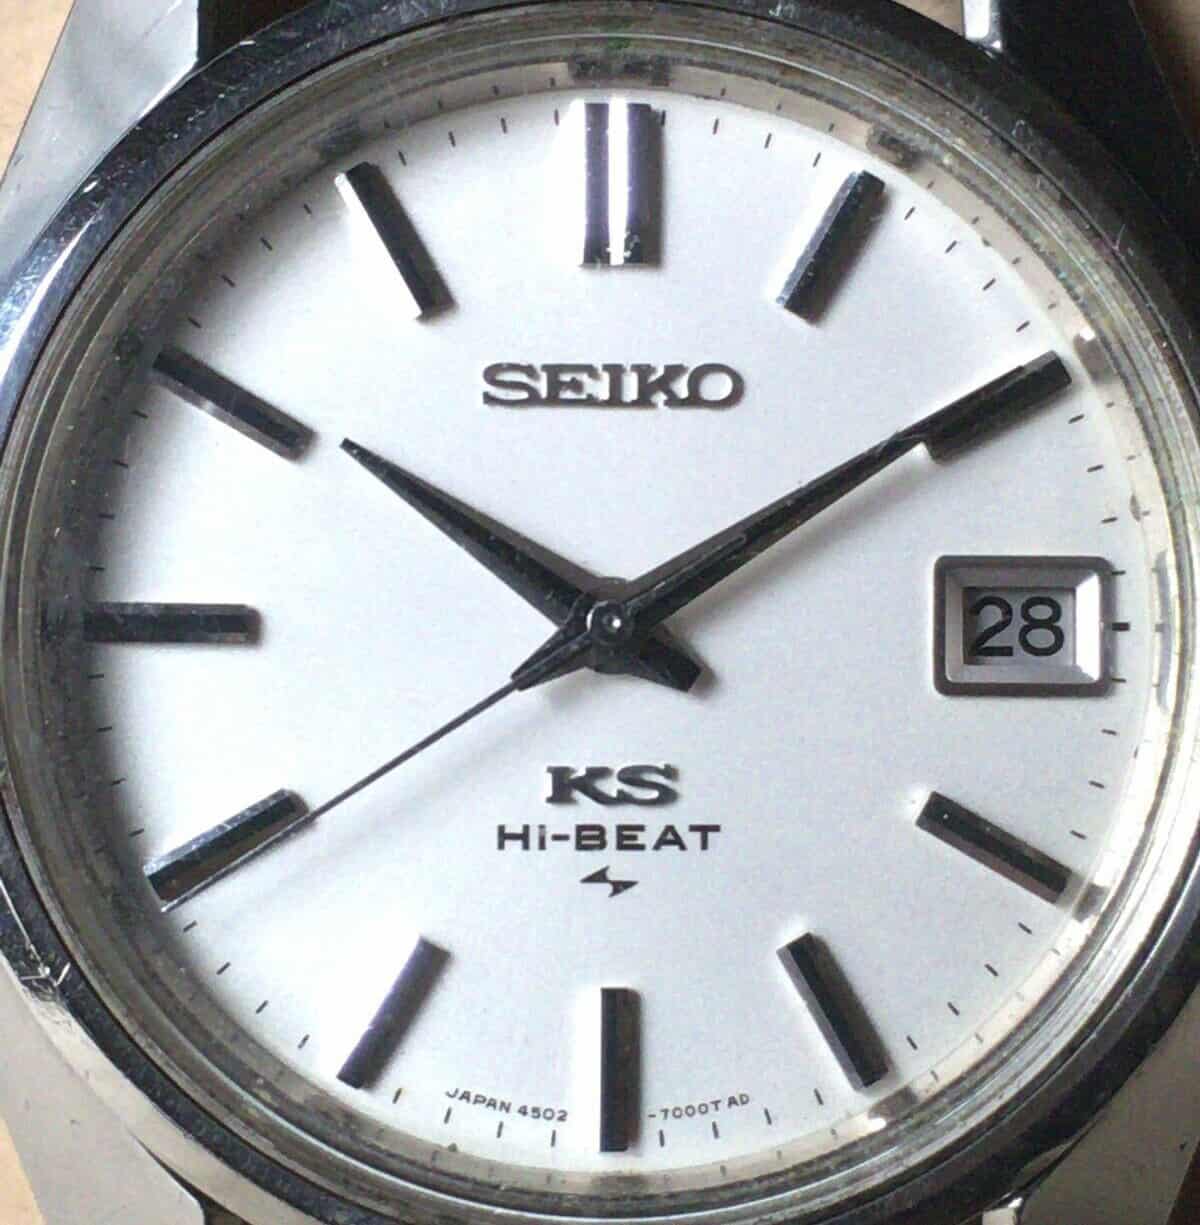 eBay Finds: Vintage Seiko Edition With a Notched Ref. 6139-6009, King Seiko Ref. 4502-7001, and More